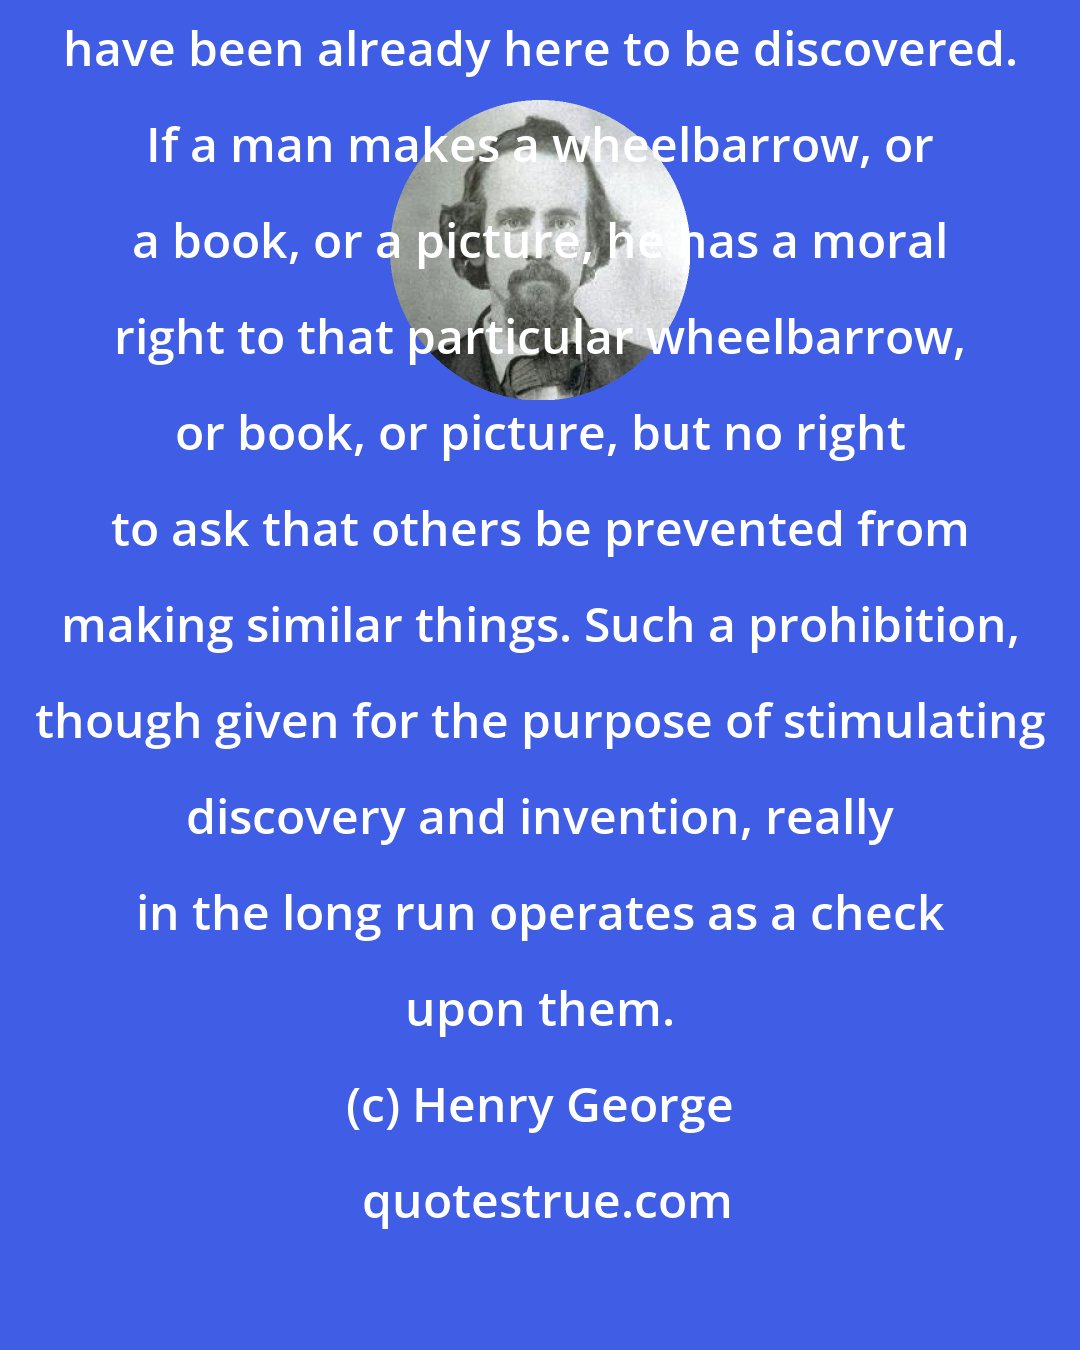 Henry George: Discovery can give no right of ownership, for whatever is discovered must have been already here to be discovered. If a man makes a wheelbarrow, or a book, or a picture, he has a moral right to that particular wheelbarrow, or book, or picture, but no right to ask that others be prevented from making similar things. Such a prohibition, though given for the purpose of stimulating discovery and invention, really in the long run operates as a check upon them.